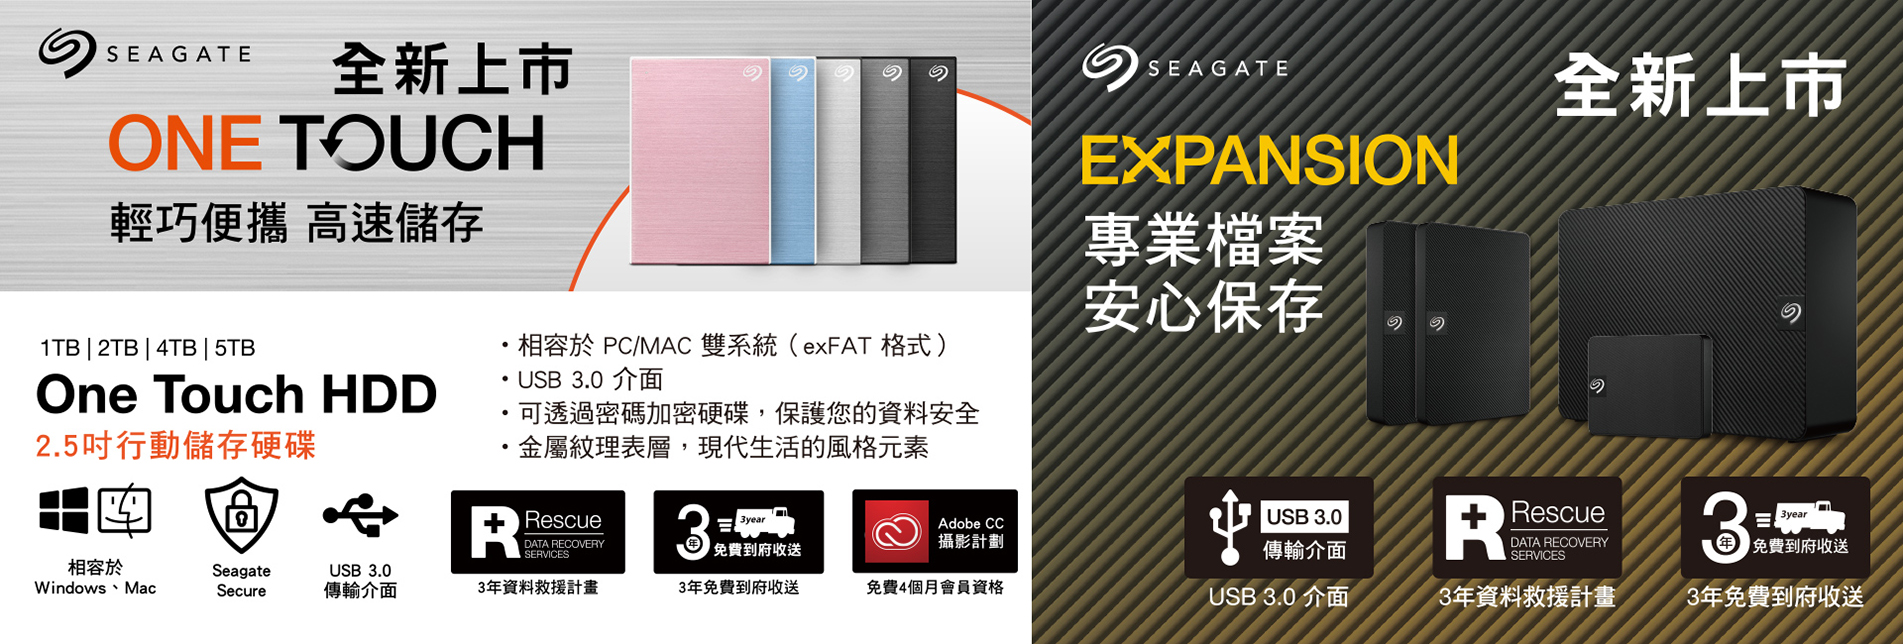 Seagate HDD 硬碟新品【One Touch系列】&【EXPANSION系列】全新上市!